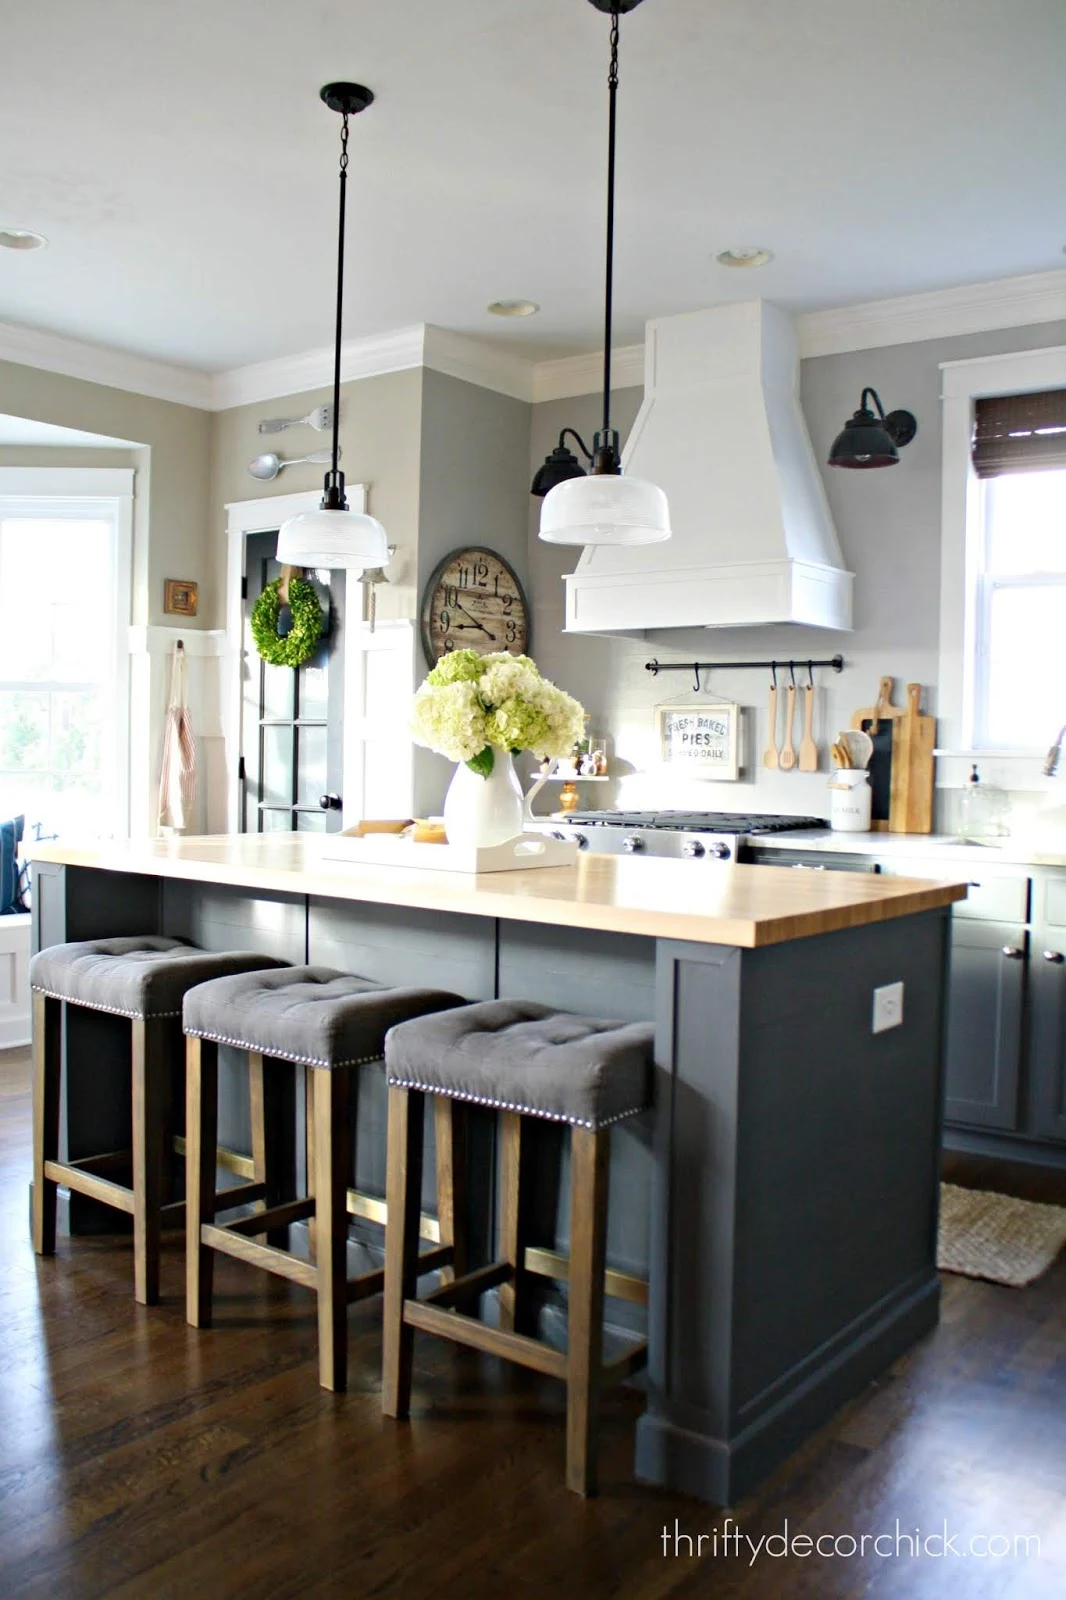 How to extend an existing kitchen island